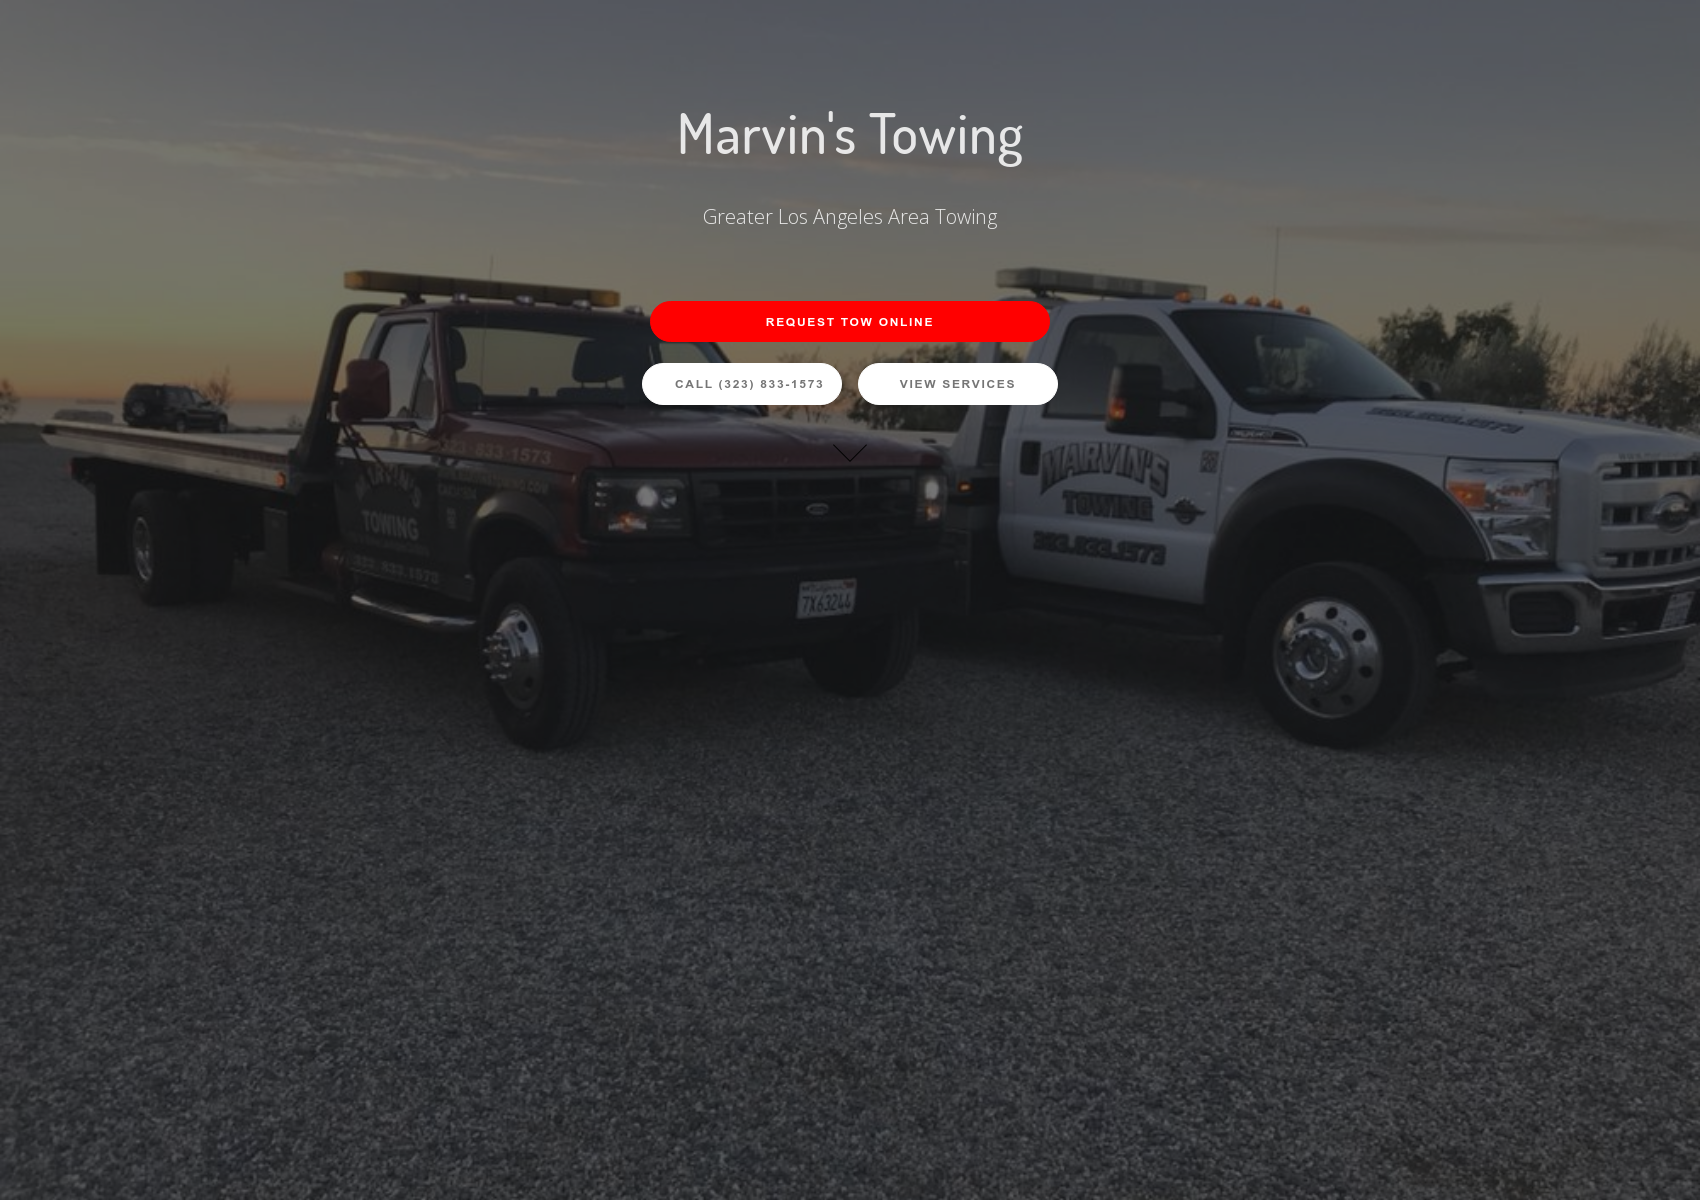 Marvins Towing